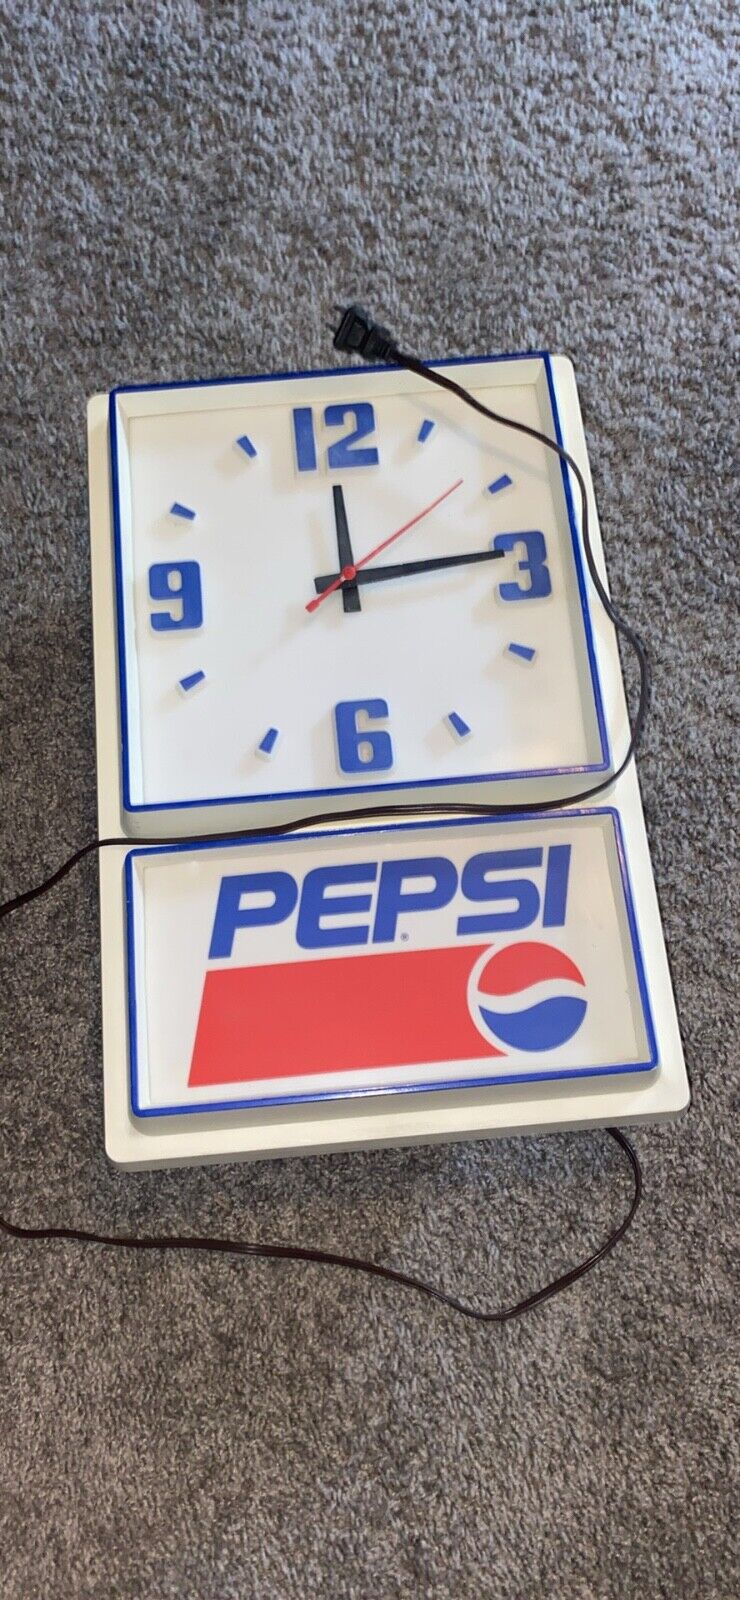 Vintage Pepsi clock, lights up and is working 